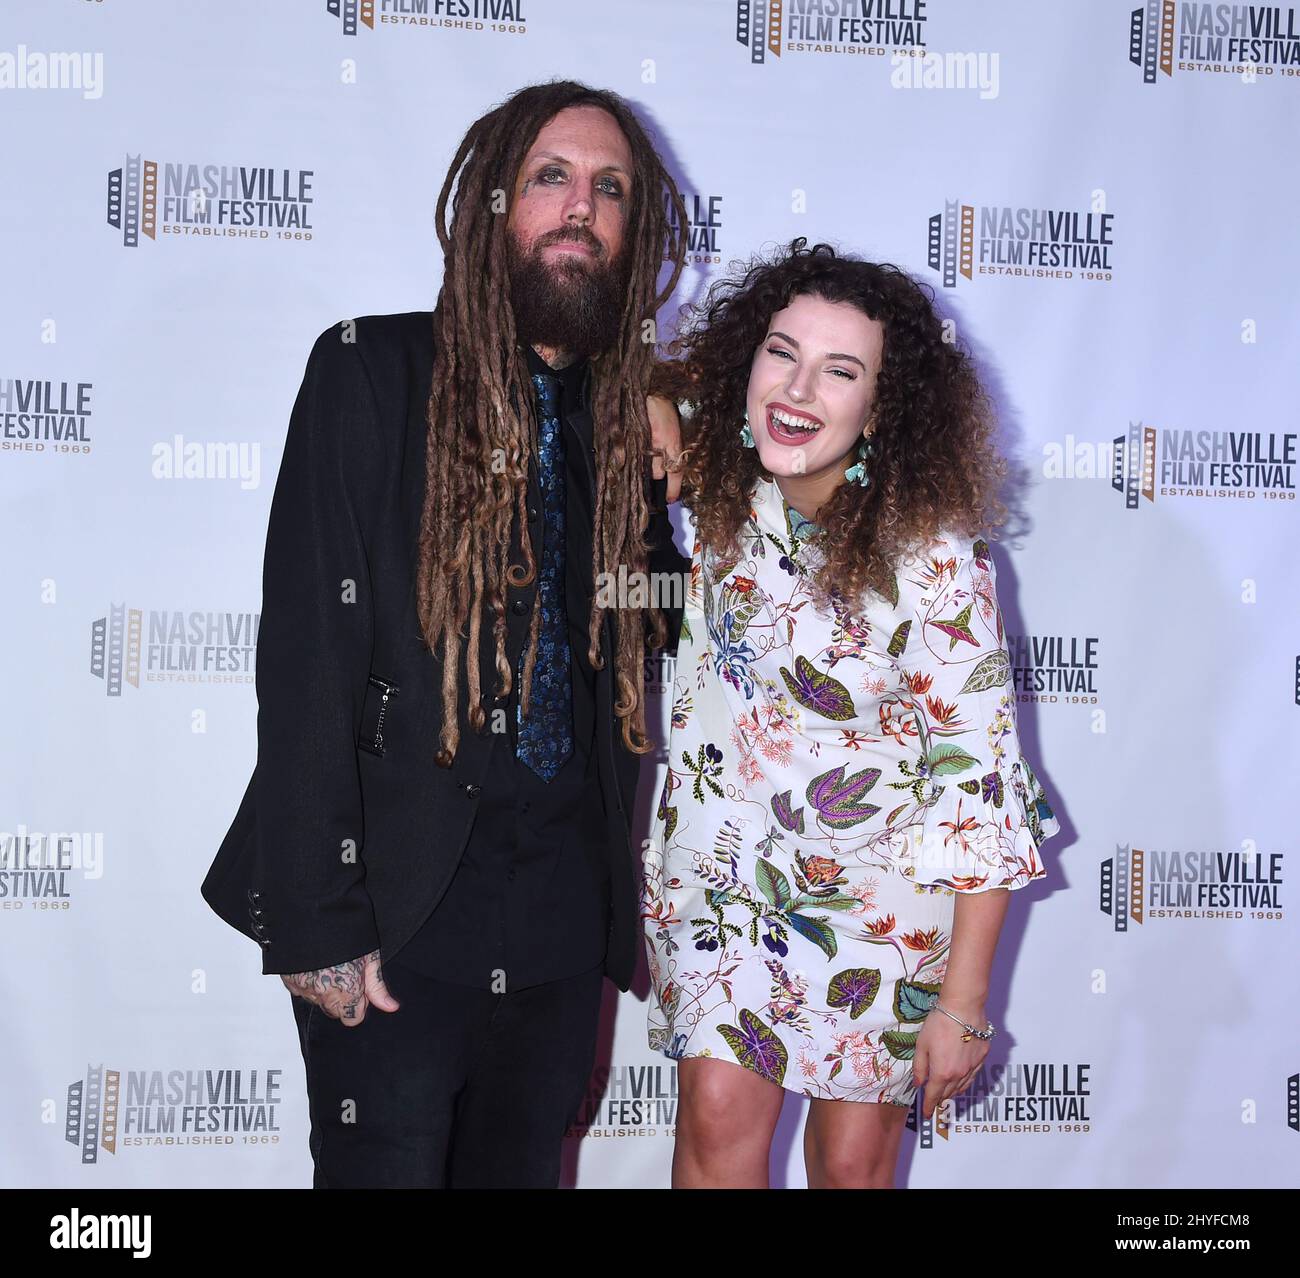 Brian Welch and Jennea Welch of the band Korn attend the screening of 'Loud Krazy Love' during the Nashville Film Festival held at the Regal 27 Hollywood Theatre on May 11, 2018 in Nashville, Tennessee Stock Photo